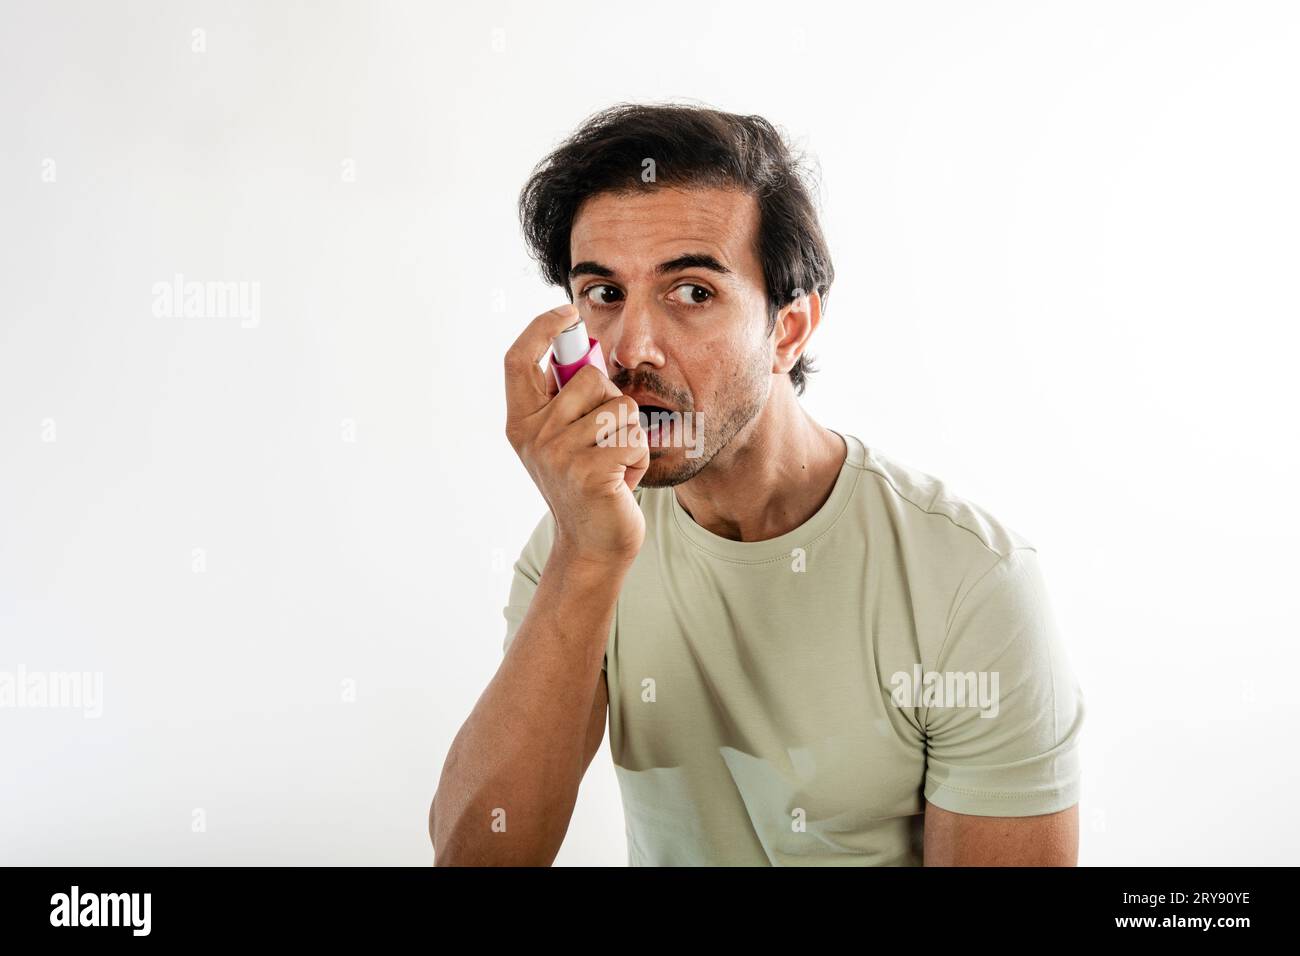 Asian young man from india using a respiratory inhaler. Study shot on white background, selective focus. Stock Photo